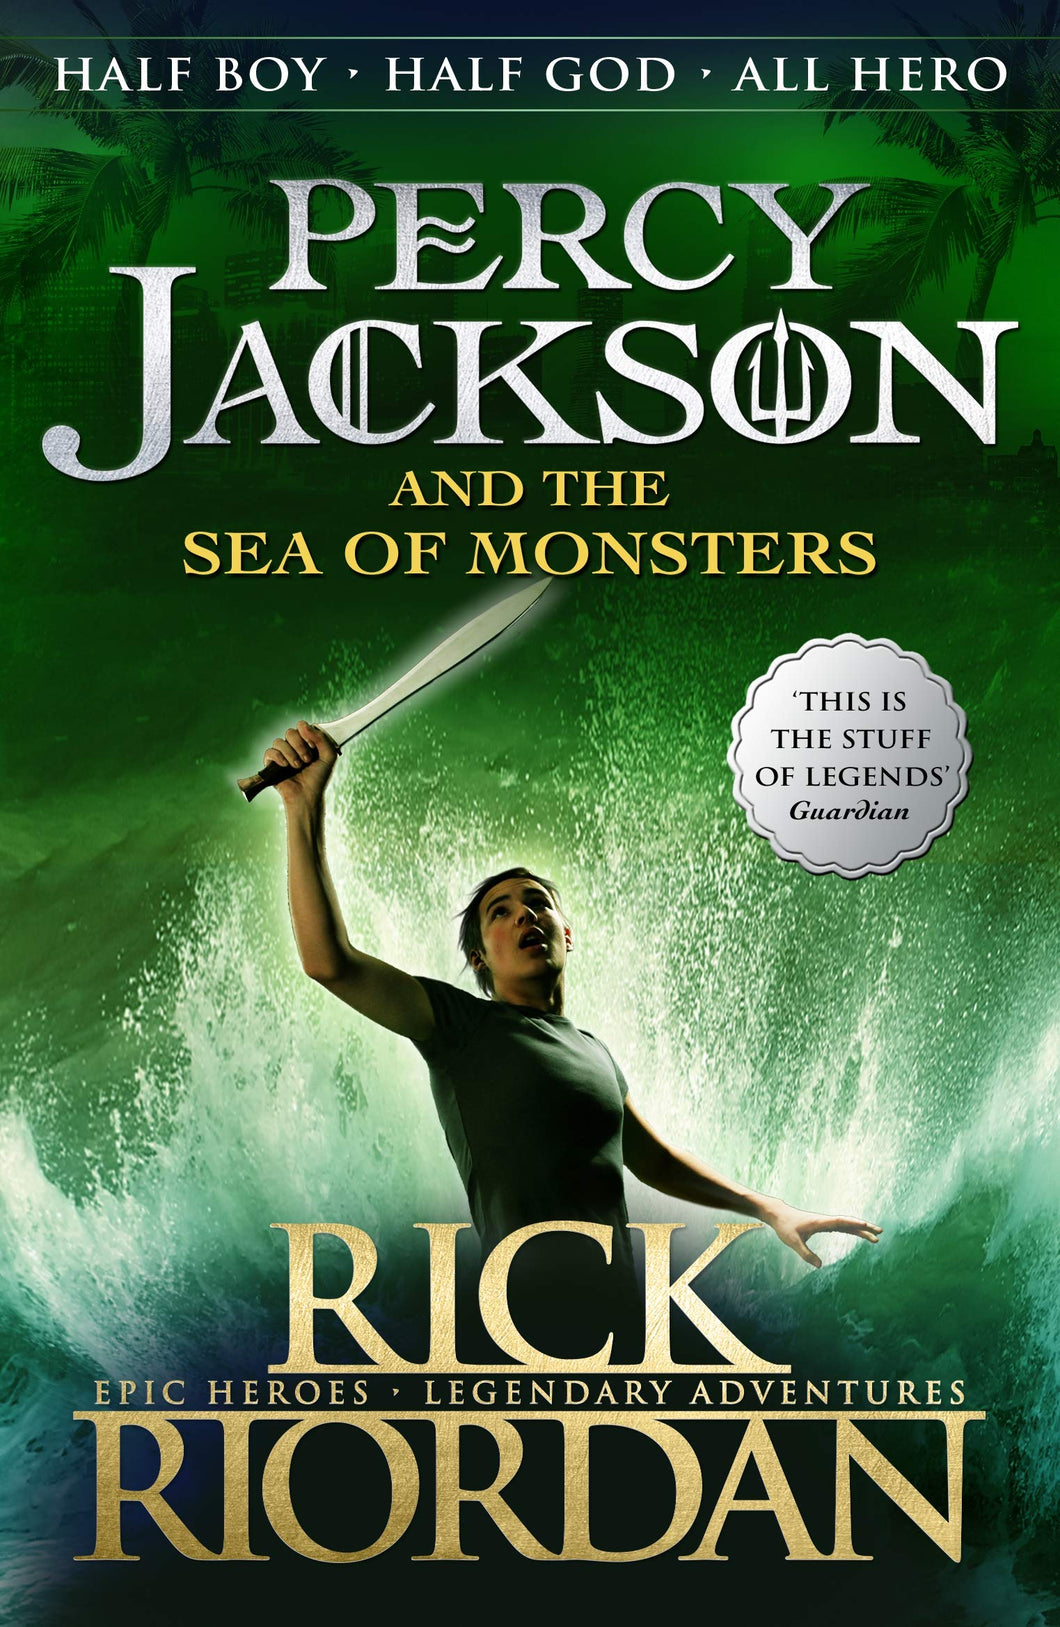 Percy Jackson and the Sea of Monsters (#2)